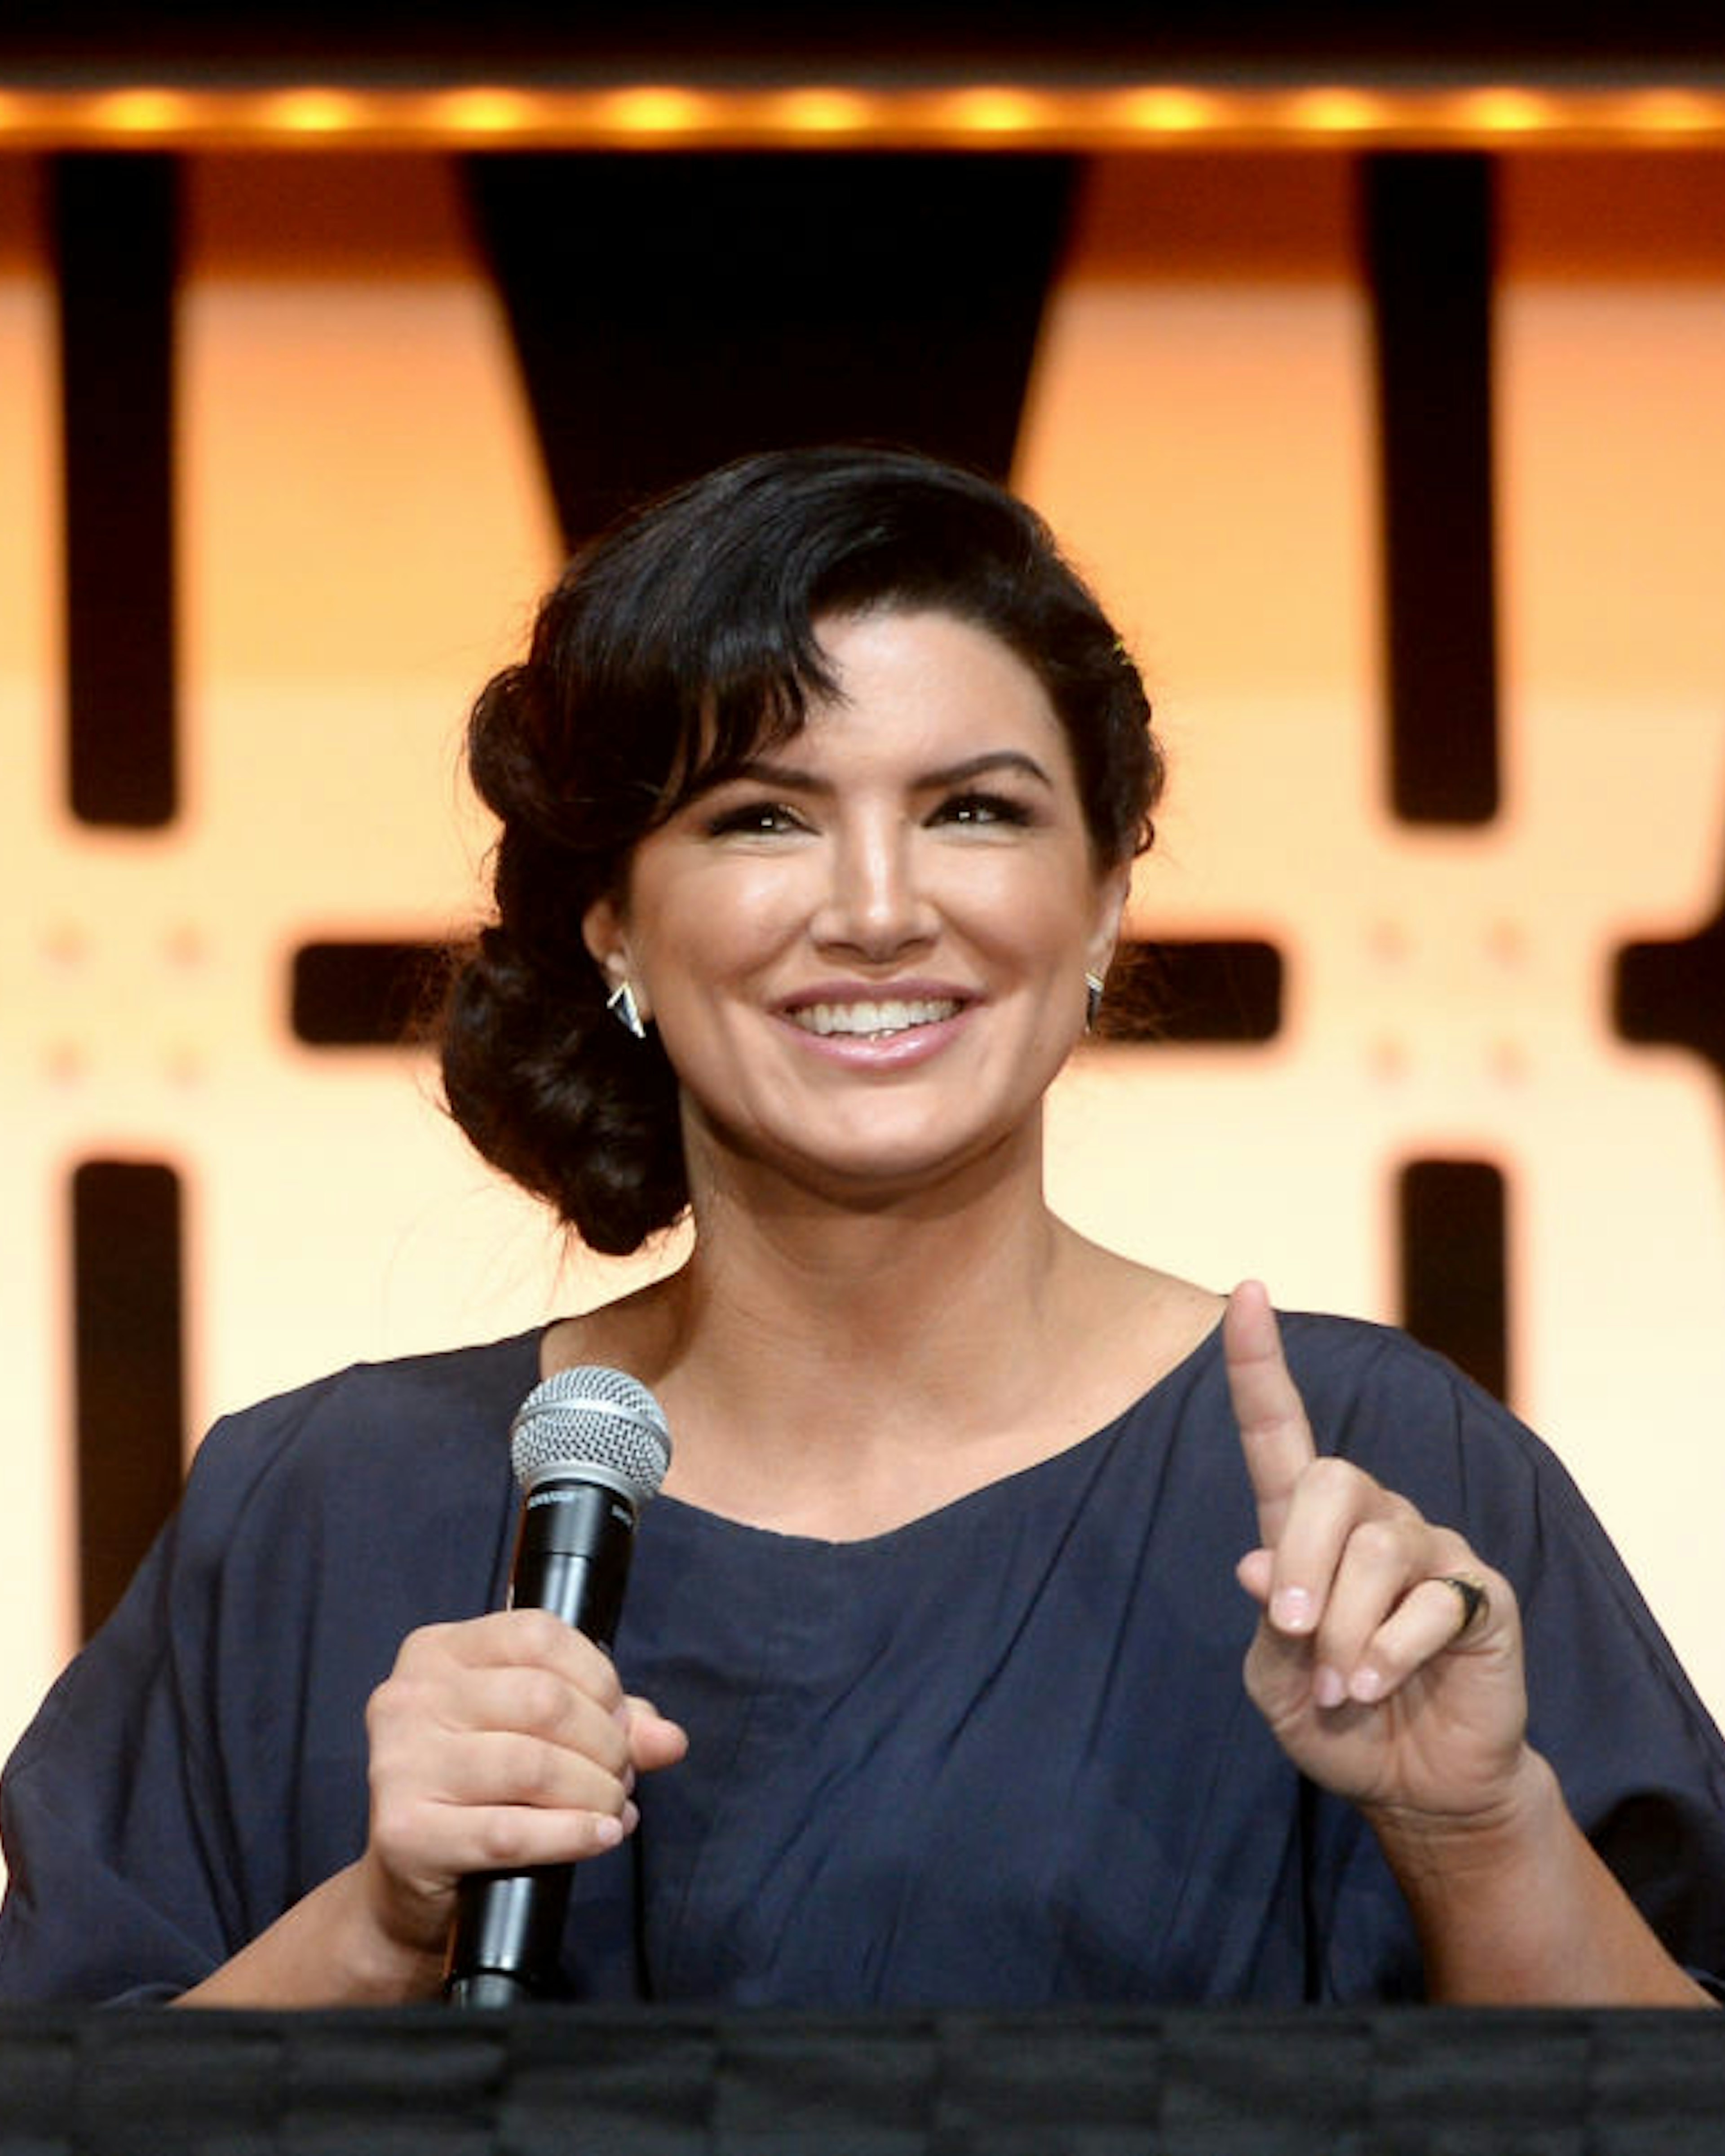 CHICAGO, IL - APRIL 14: Gina Carano (Cara Dune) onstage during "The Mandalorian" panel at the Star Wars Celebration at McCormick Place Convention Center on April 14, 2019 in Chicago, Illinois. (Photo by Daniel Boczarski/WireImage for Disney)